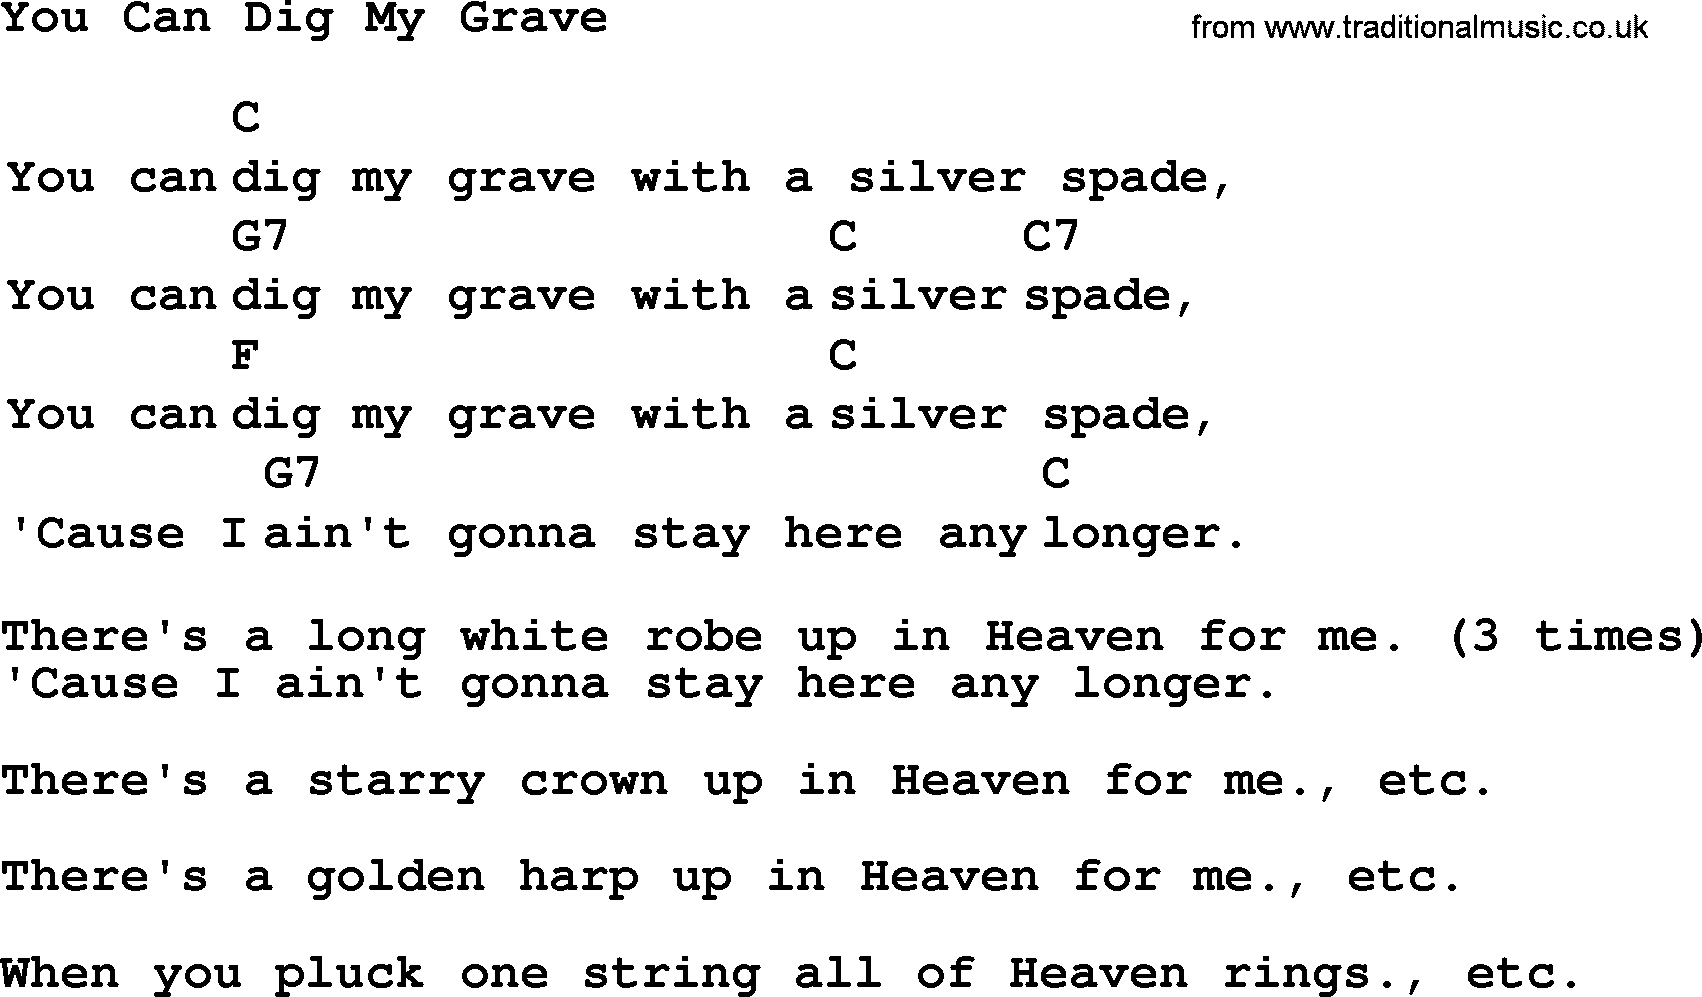 Top 1000 Most Popular Folk and Old-time Songs: You Can Dig My Grave, lyrics and chords